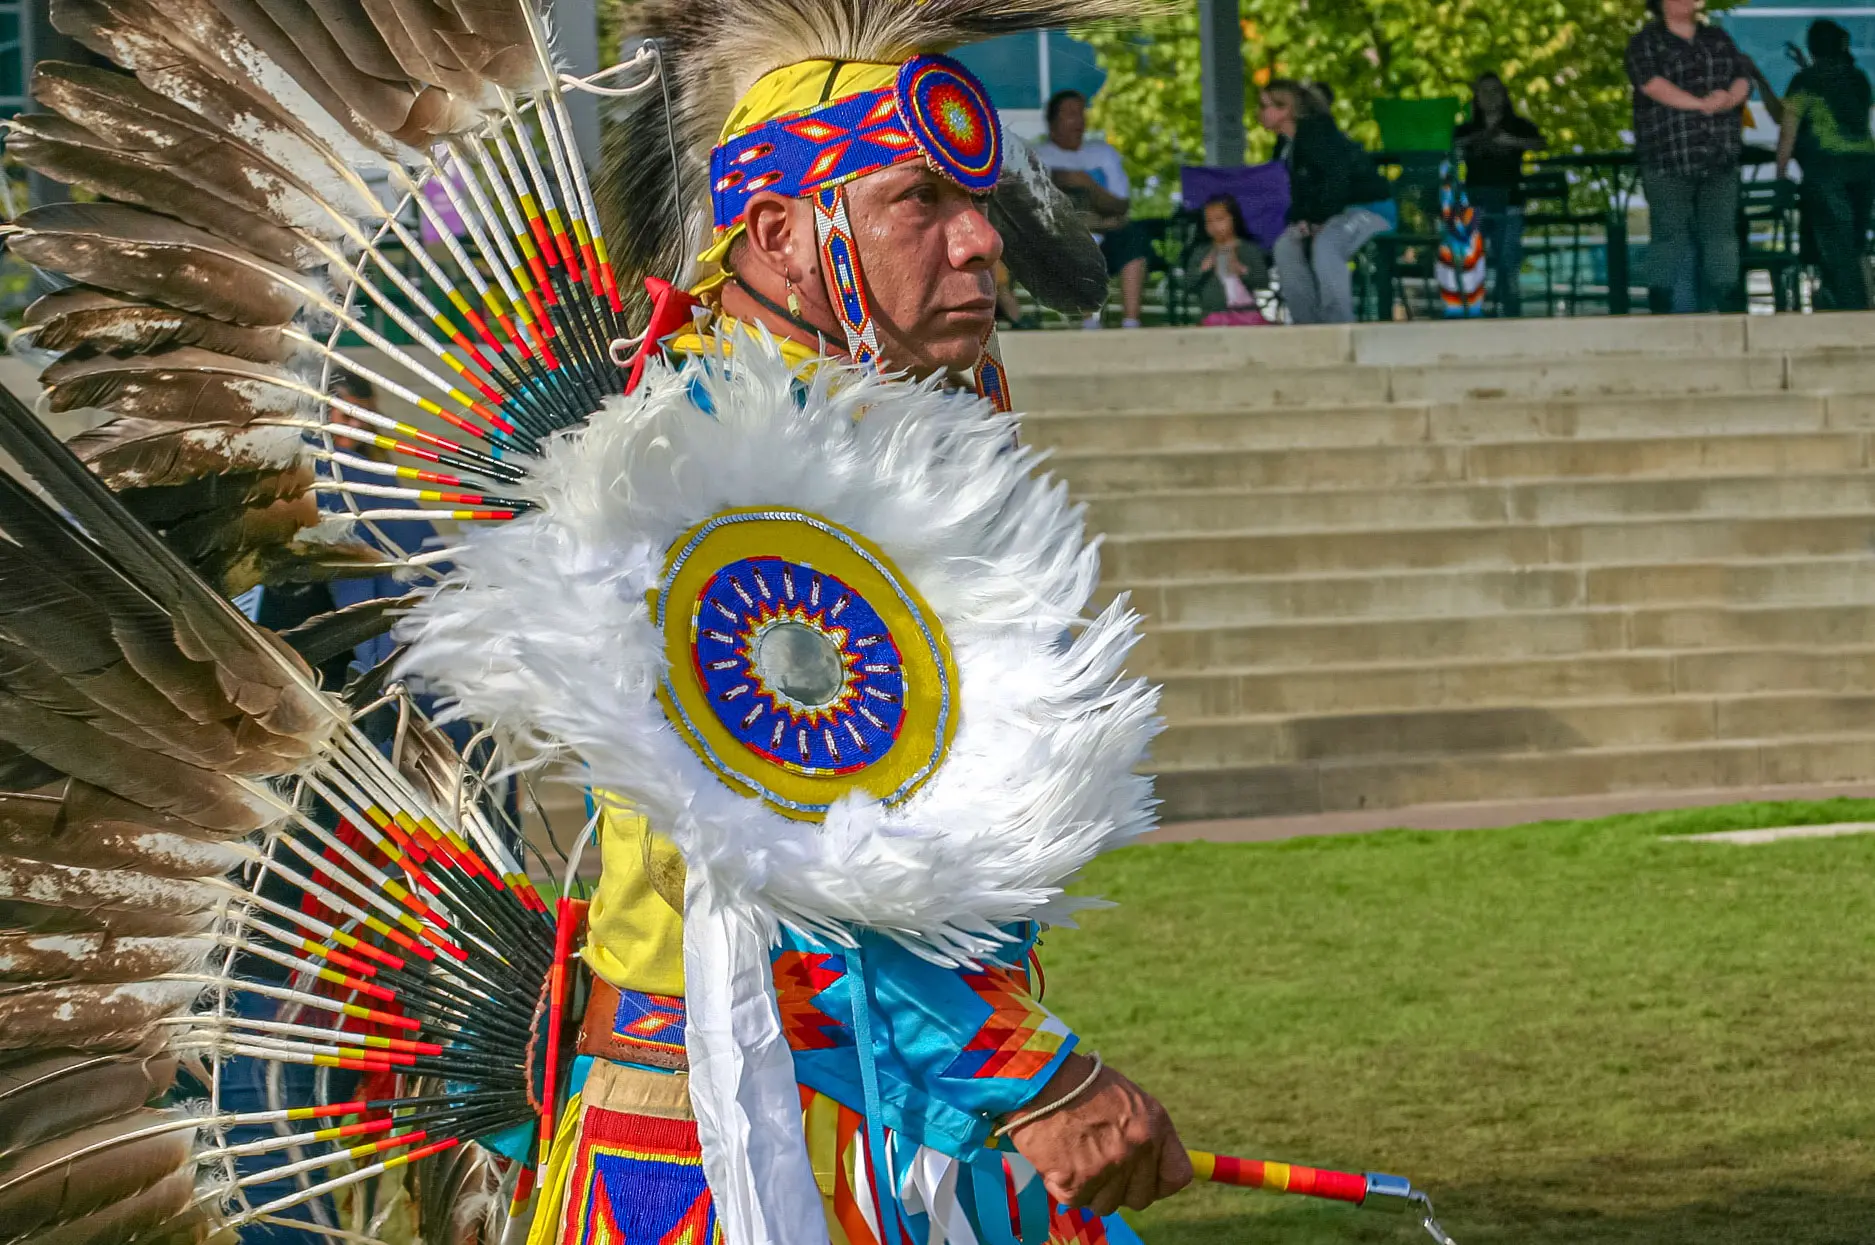 14-facts-about-oklahoma-indian-summer-festival